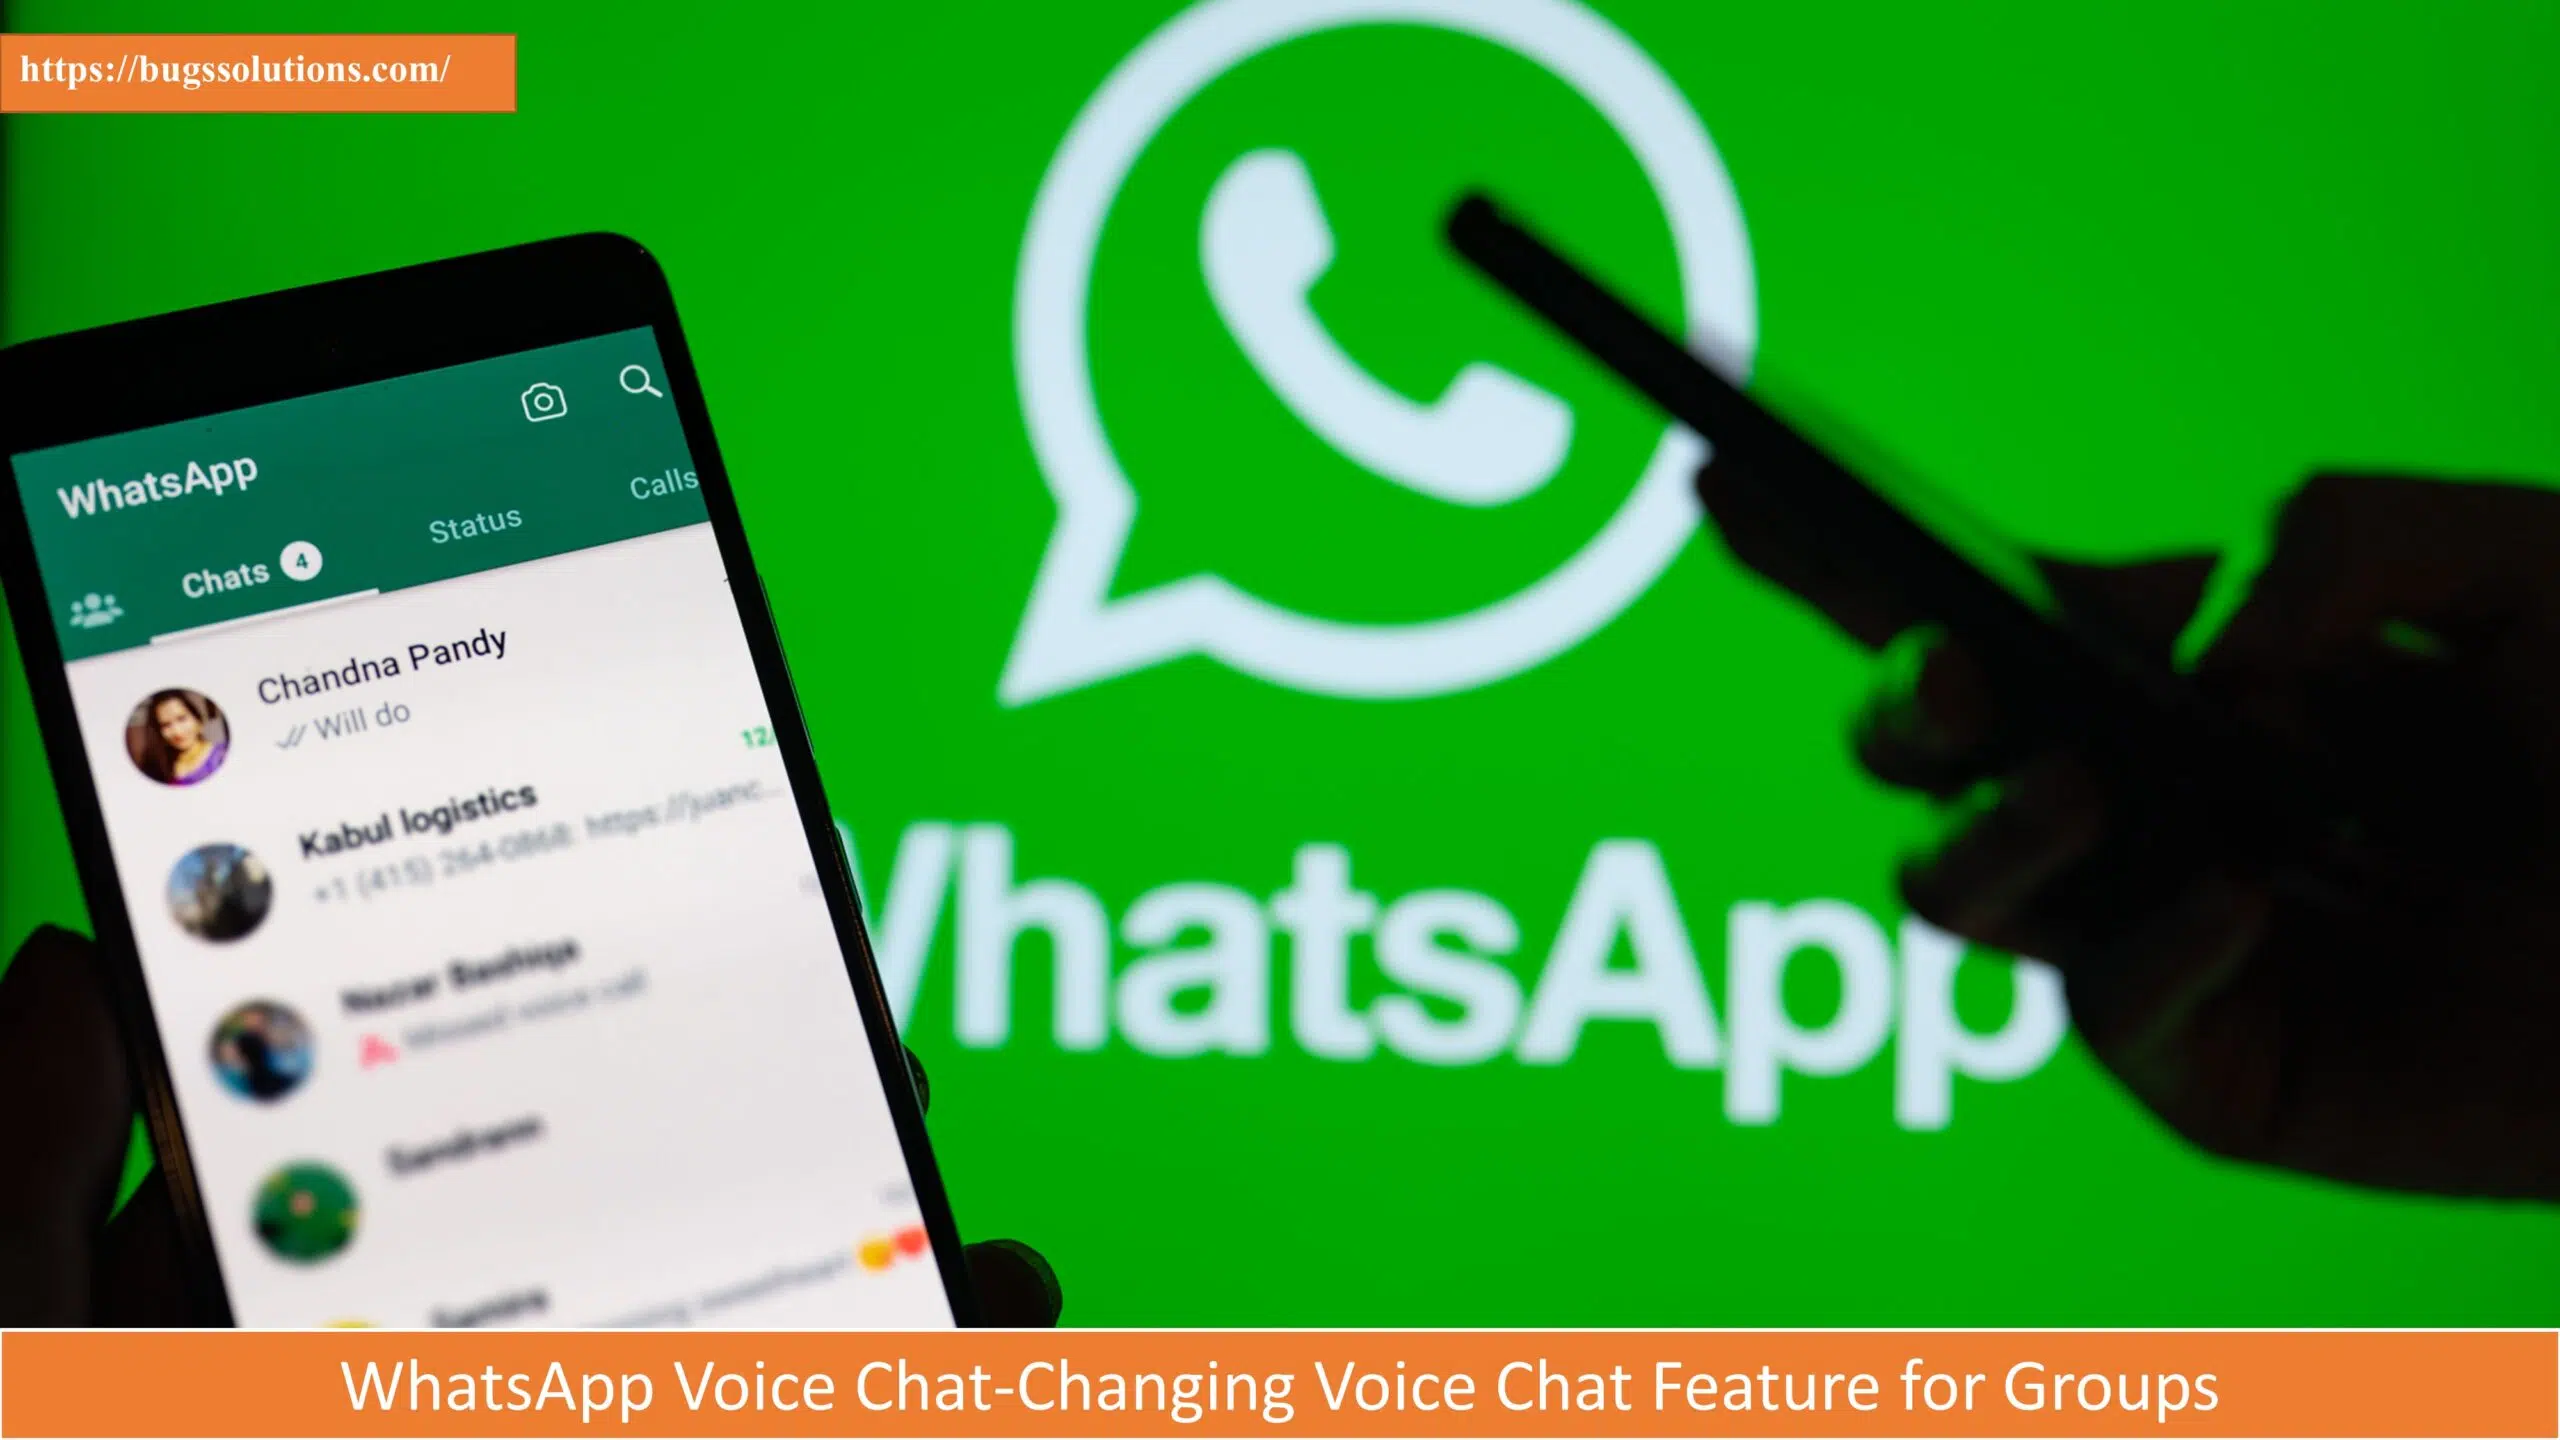 WhatsApp Voice Chat-Changing Voice Chat Feature for Groups